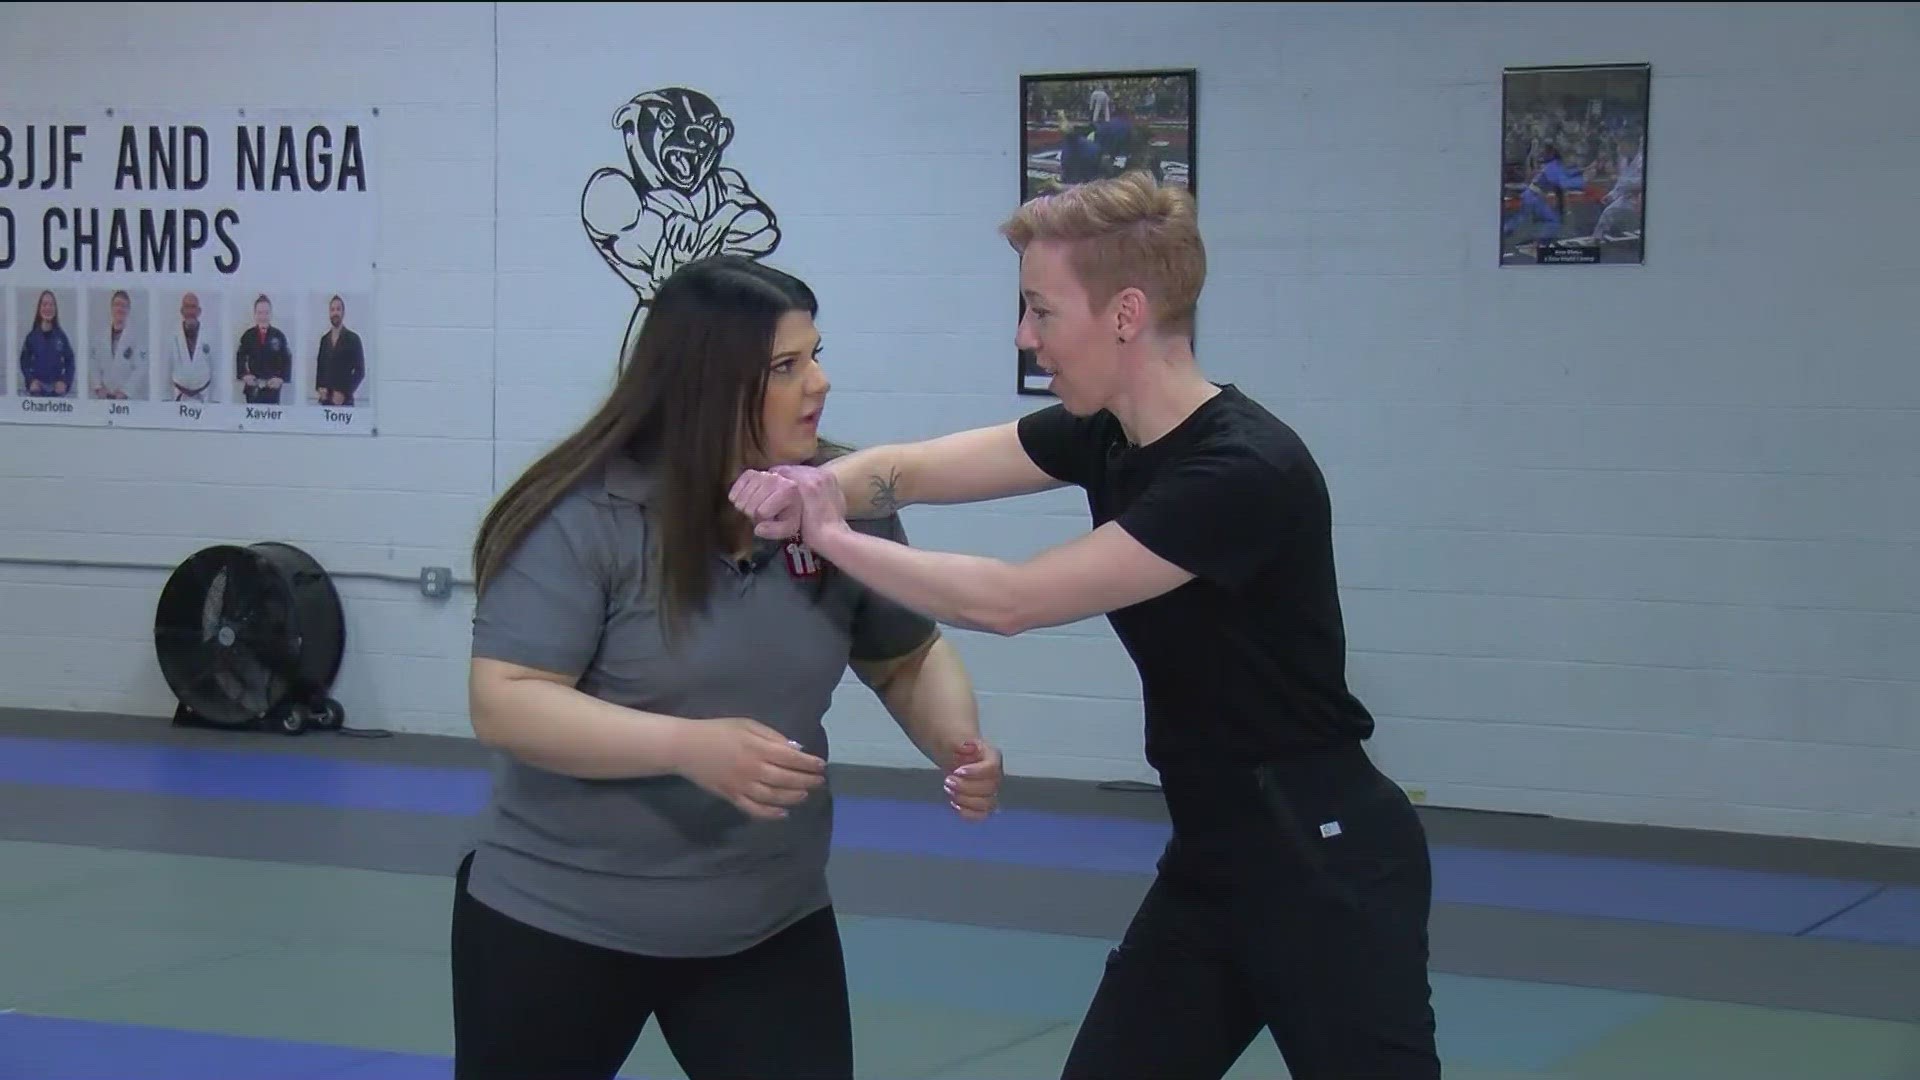 A local program aimed at protecting women gears up for their free training sessions at the Toledo Jujitsu Center this weekend.